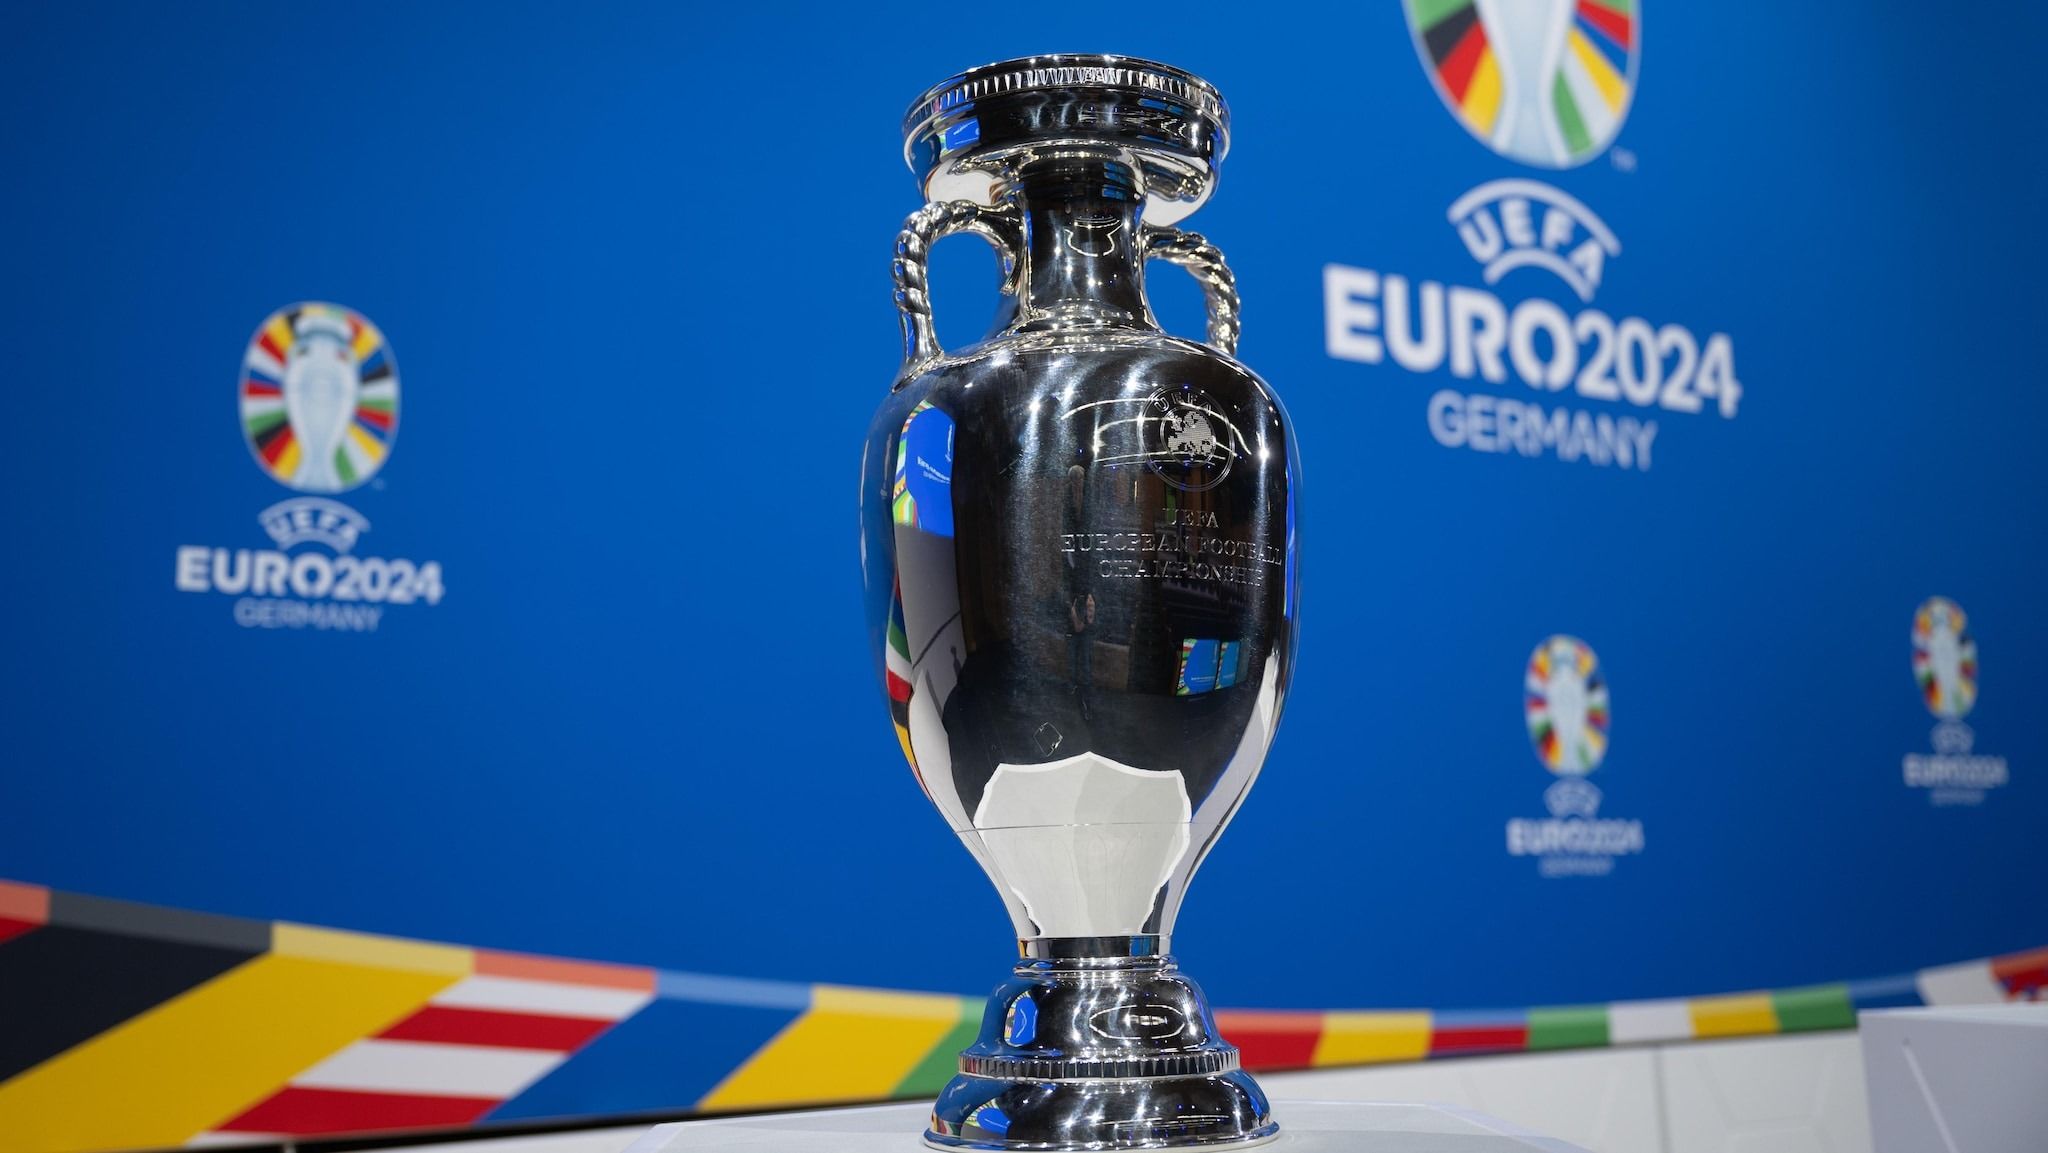 Cies Football Observatory Names Top Contenders for Euro 2024